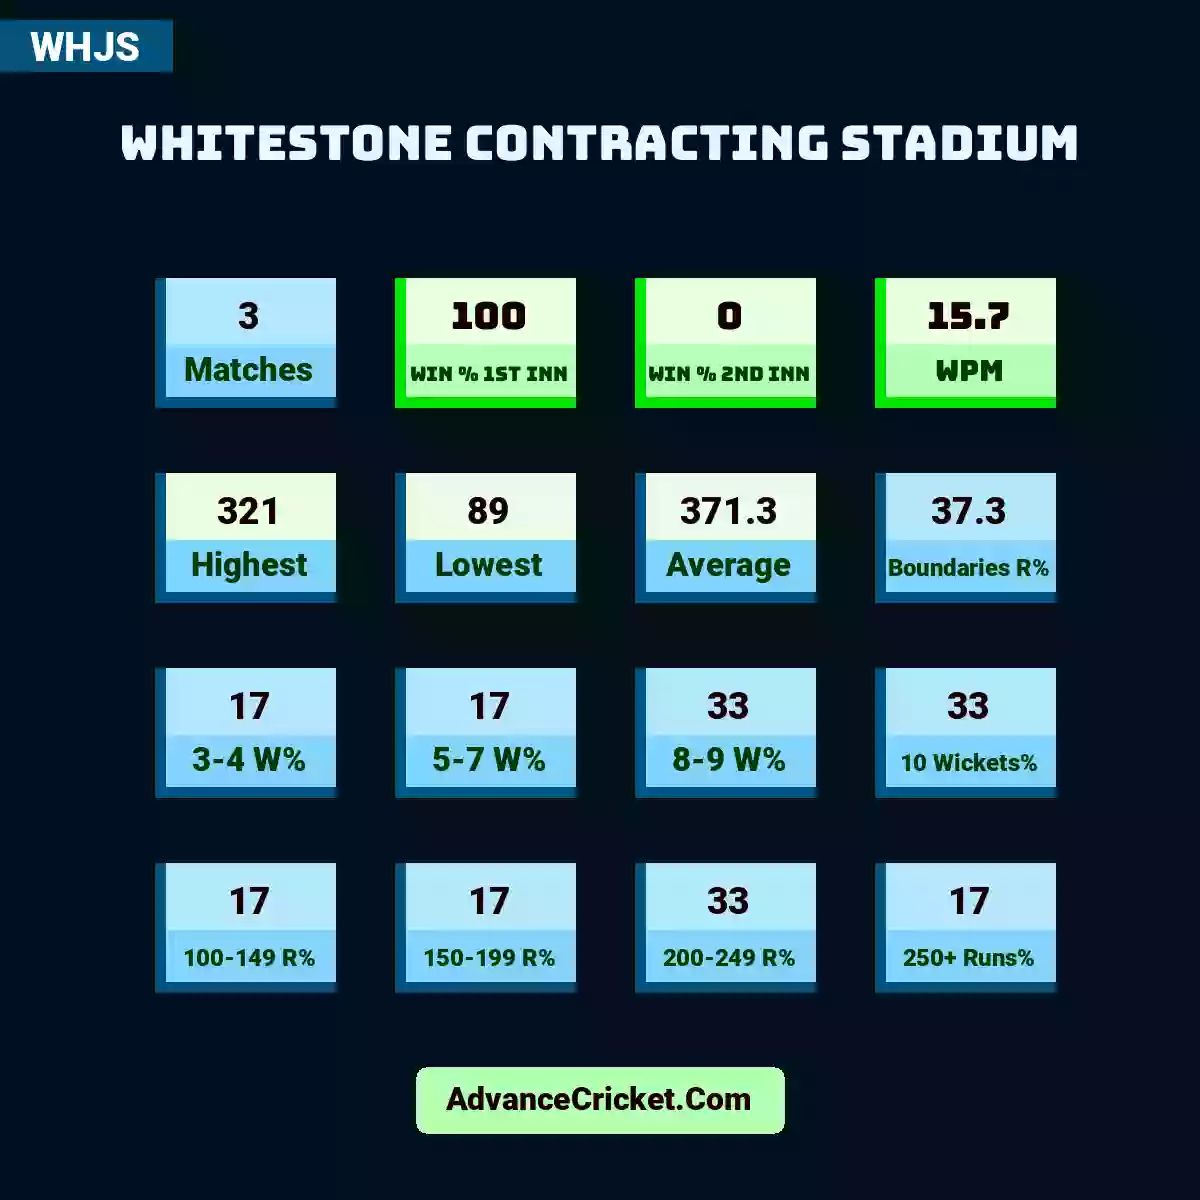 Image showing Whitestone Contracting Stadium with Matches: 3, Win % 1st Inn: 100, Win % 2nd Inn: 0, WPM: 15.7, Highest: 321, Lowest: 89, Average: 371.3, Boundaries R%: 37.3, 3-4 W%: 17, 5-7 W%: 17, 8-9 W%: 33, 10 Wickets%: 33, 100-149 R%: 17, 150-199 R%: 17, 200-249 R%: 33, 250+ Runs%: 17.